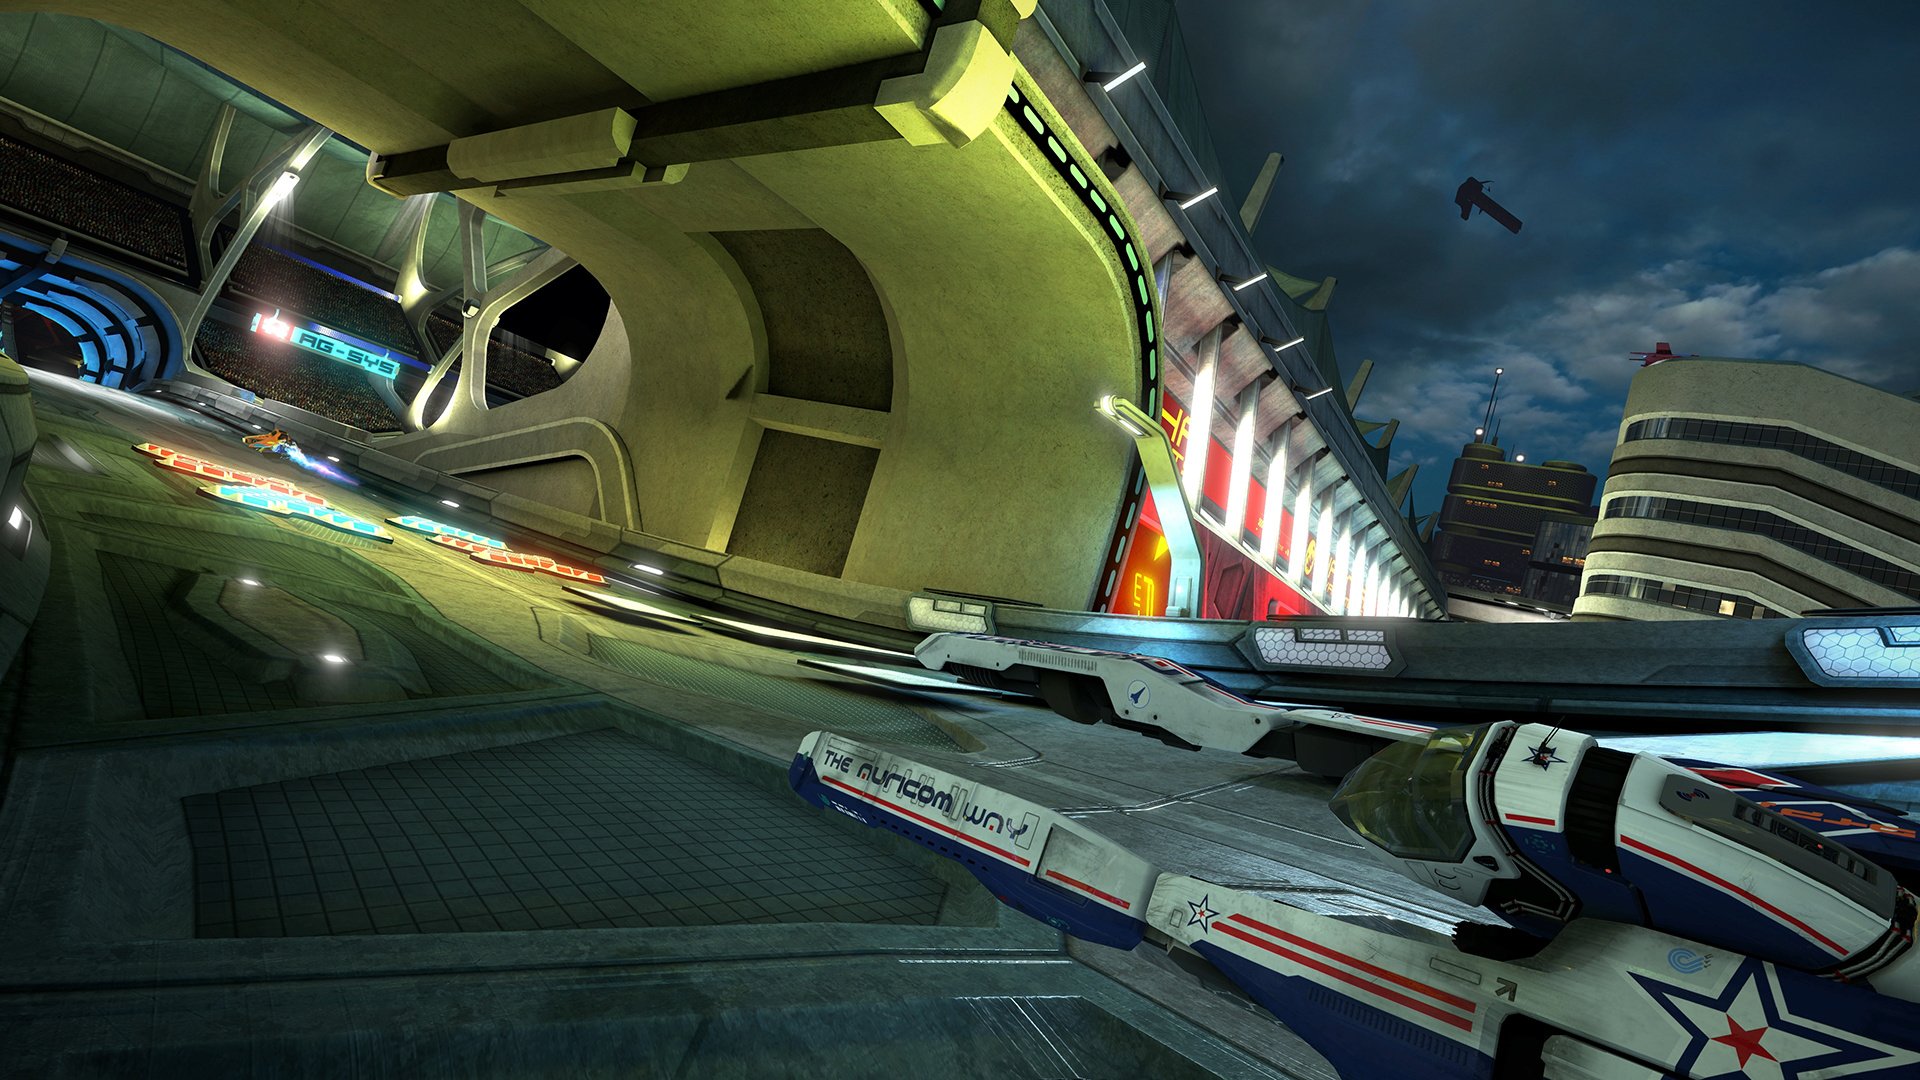 wipeout ps4 multiplayer